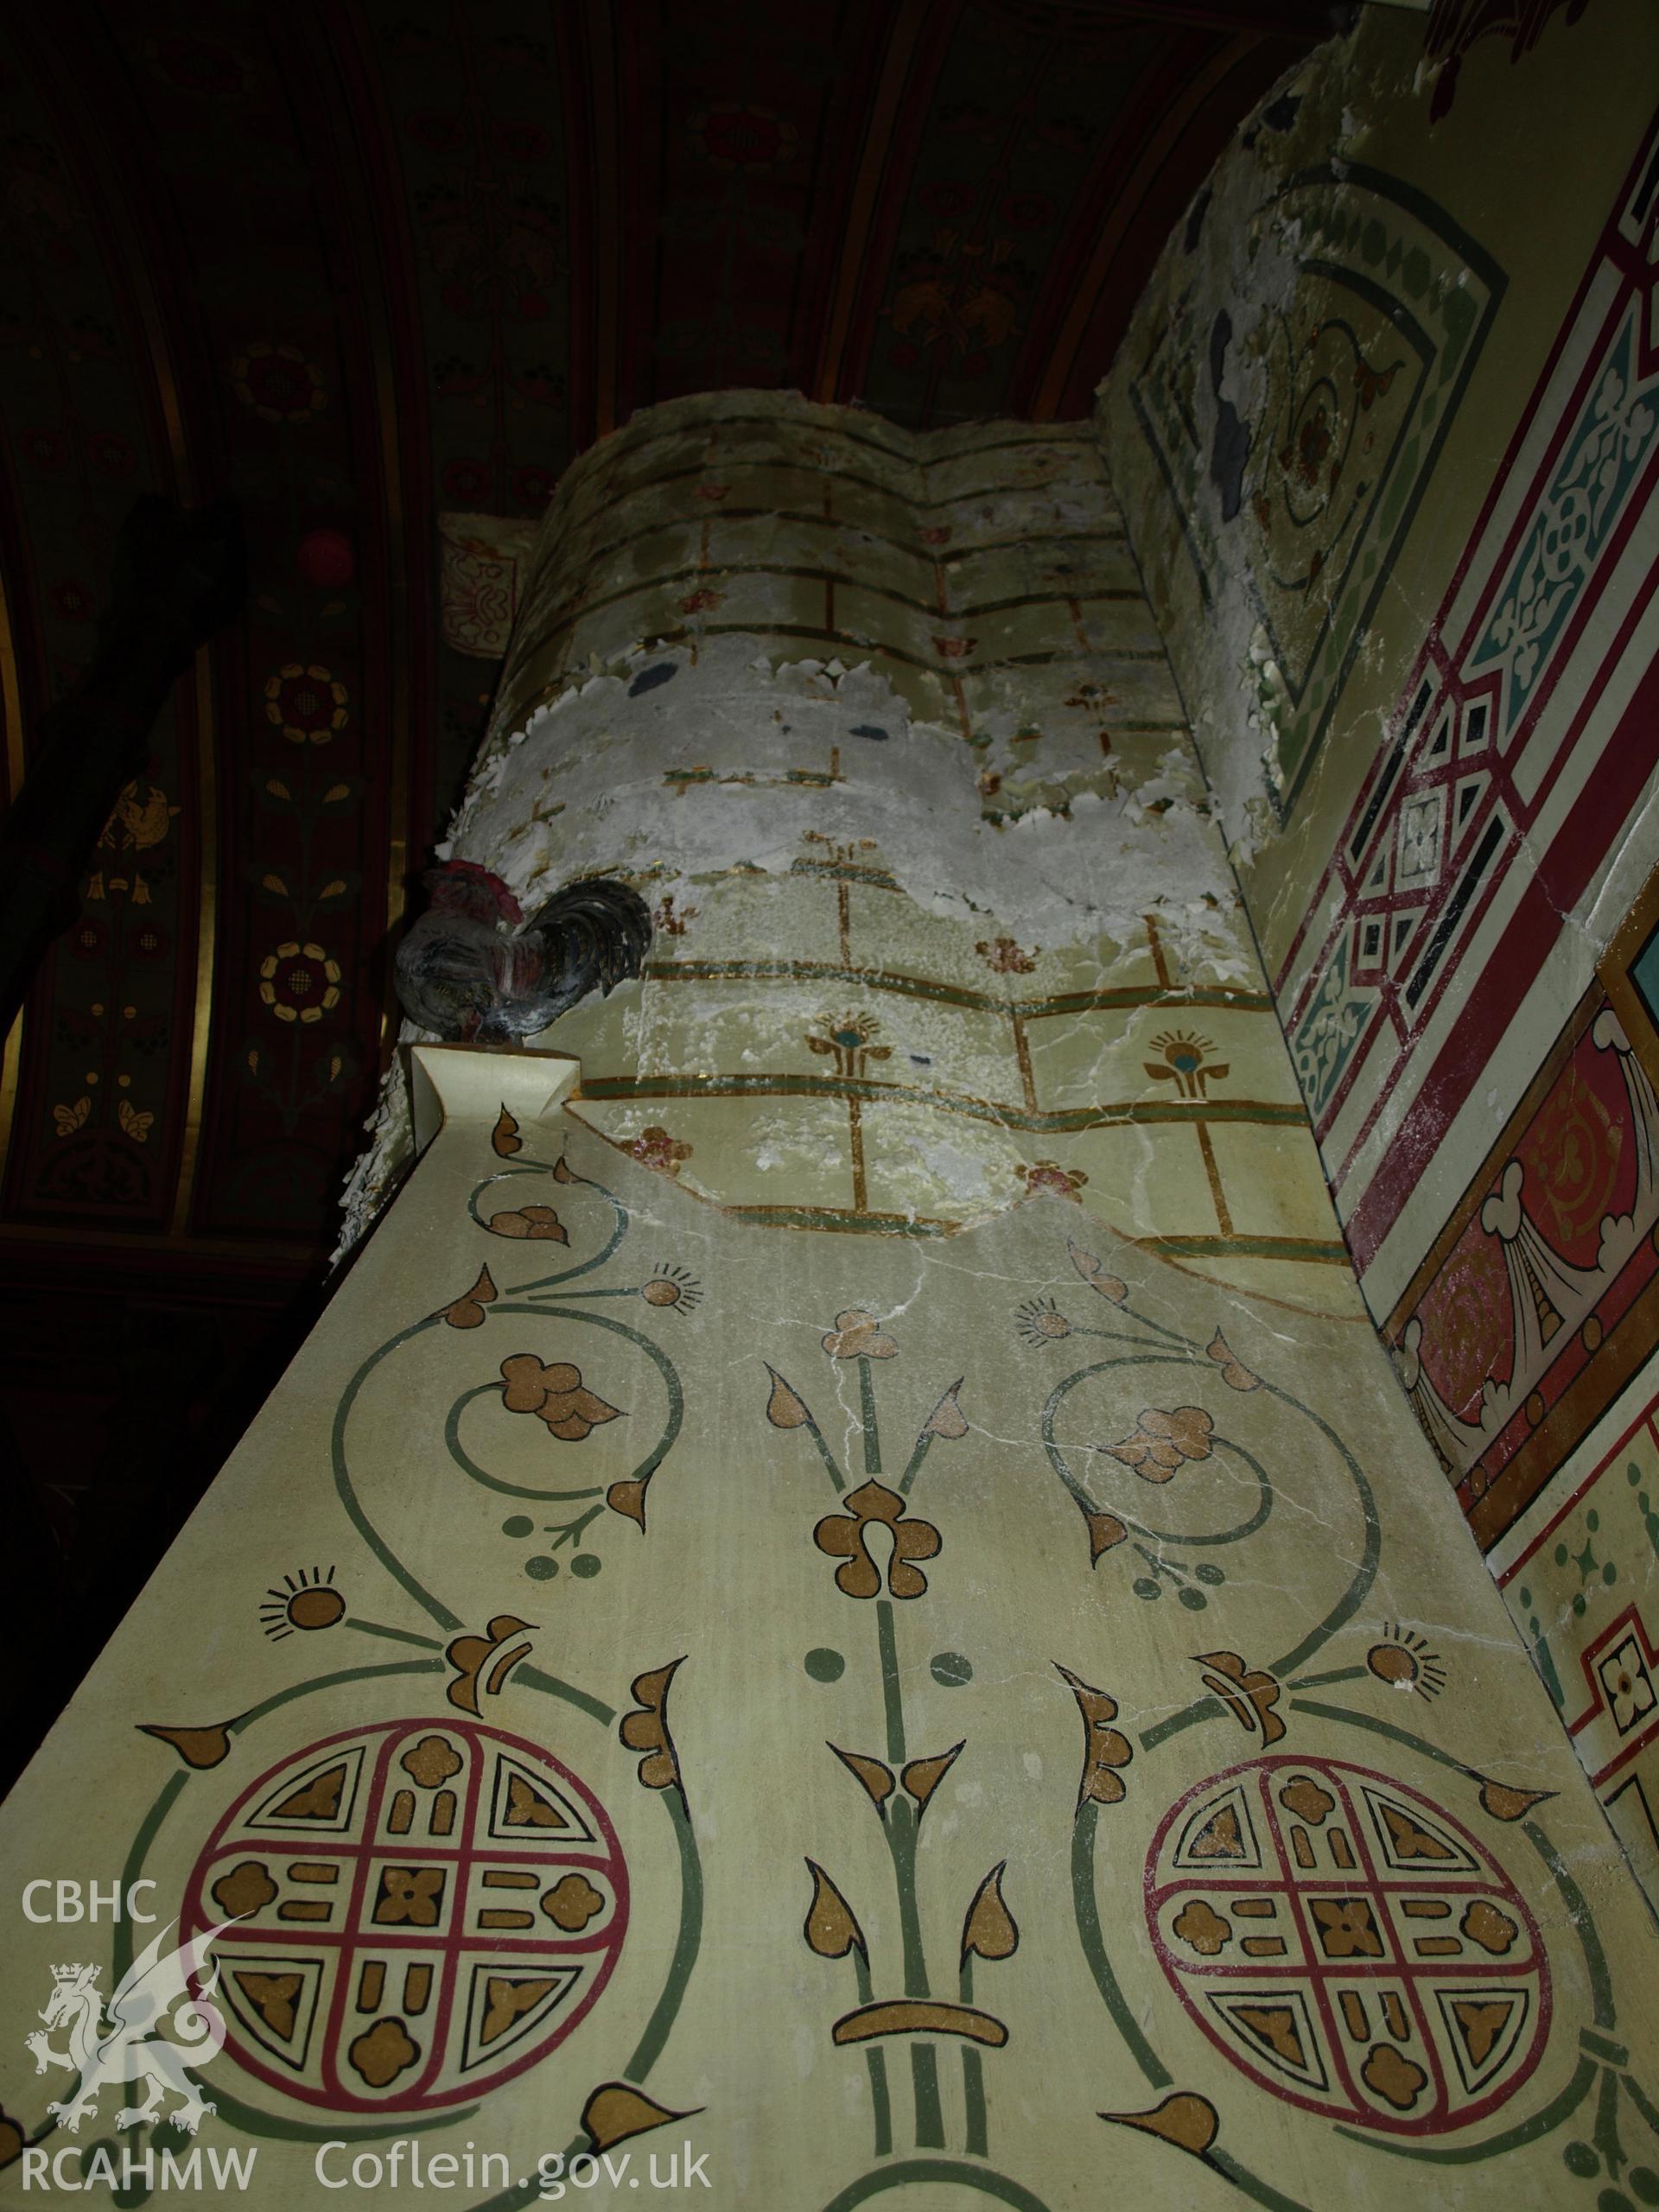 Highly decorative wall in Lord Bute's Bedroom at Castell Coch, 01/04/2019. From "Castell Coch, Tongwynlais. Archaeological Building Investigation & Recording & Watching Brief" by Richard Scott Jones, Heritage Recording Services Wales. Report No 202.